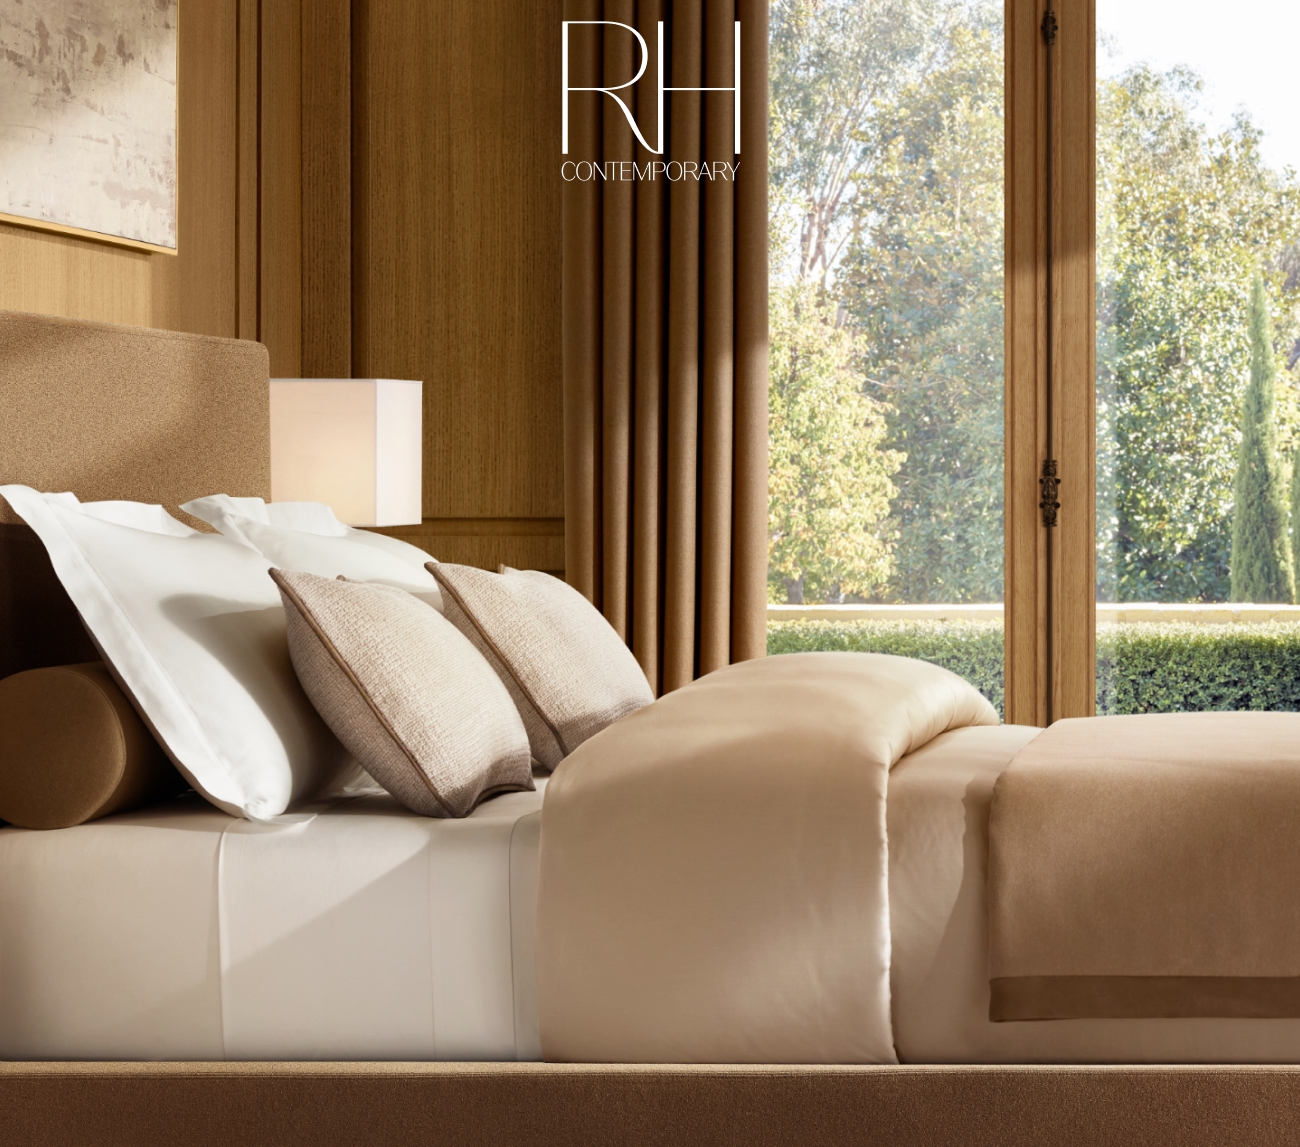 RH Contemporary. The Finest Bedding Is Made in Italy. CONTEMPORARY 